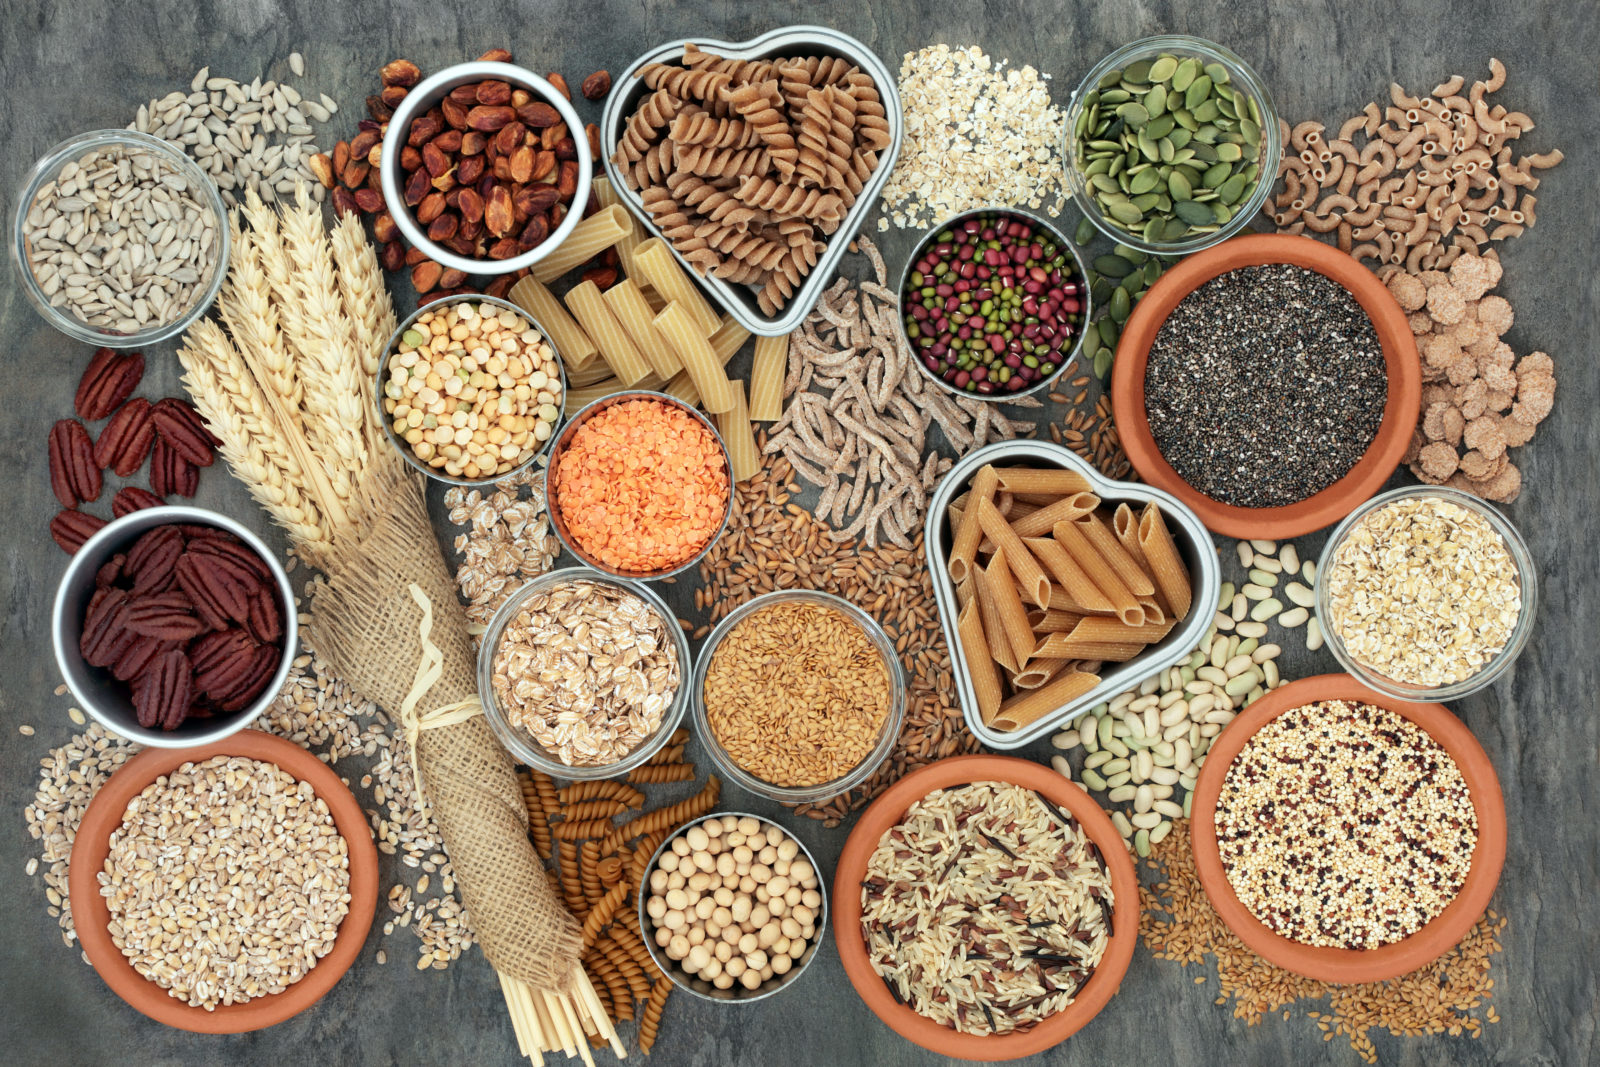 A variety of grains, seeds, nuts, and legumes are arranged on a slate background.